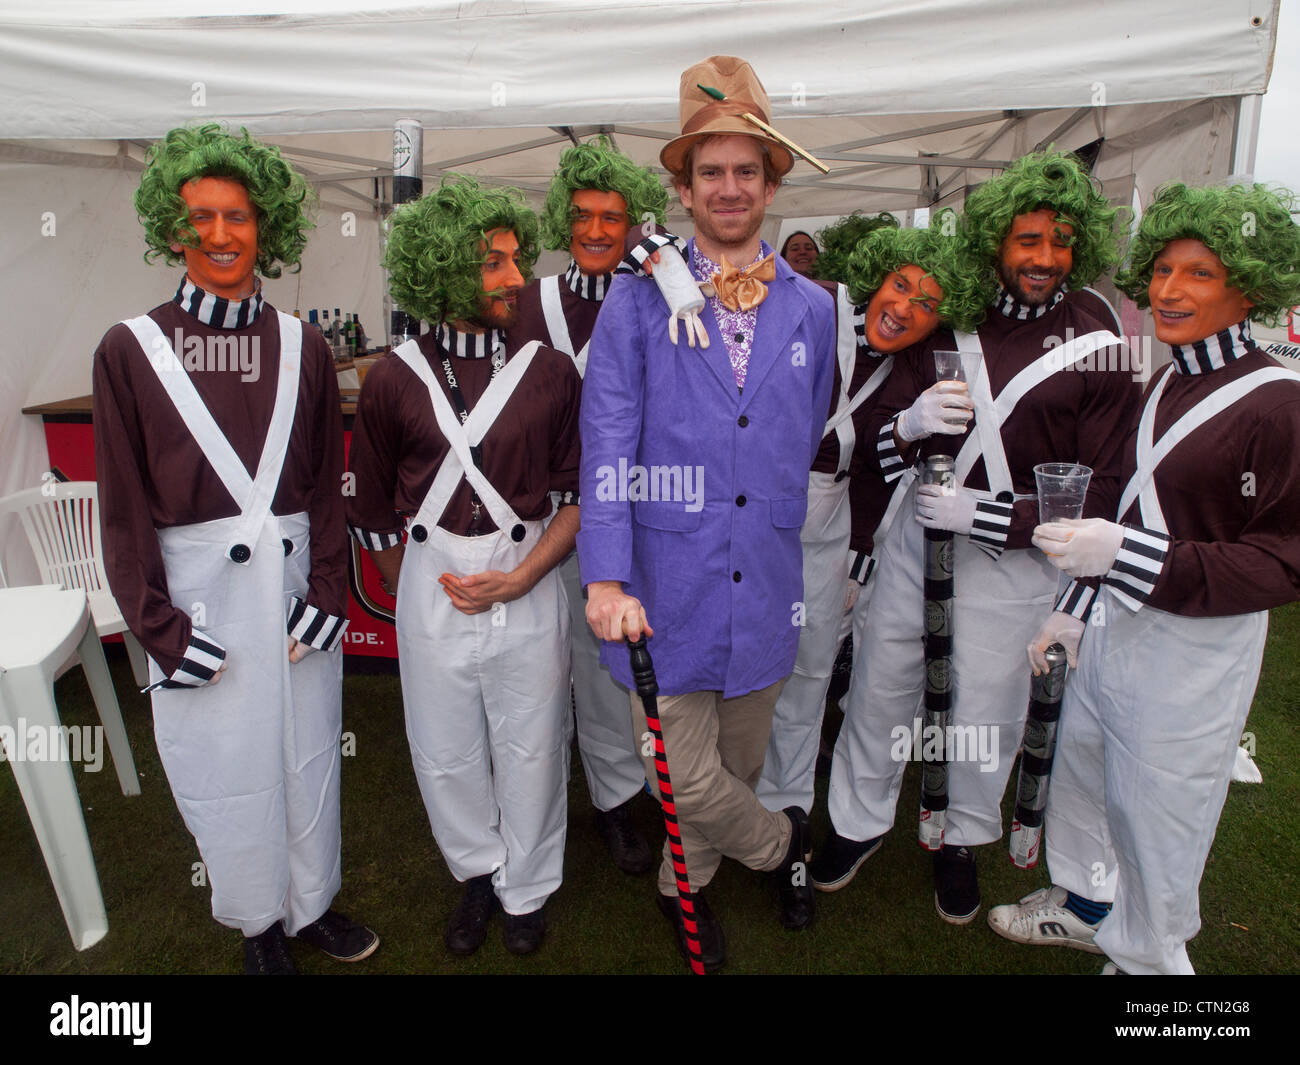 A stag party in Brighton for the weekend,dressed as Willy Wonka with the Oompa-Loompas. Stock Photo